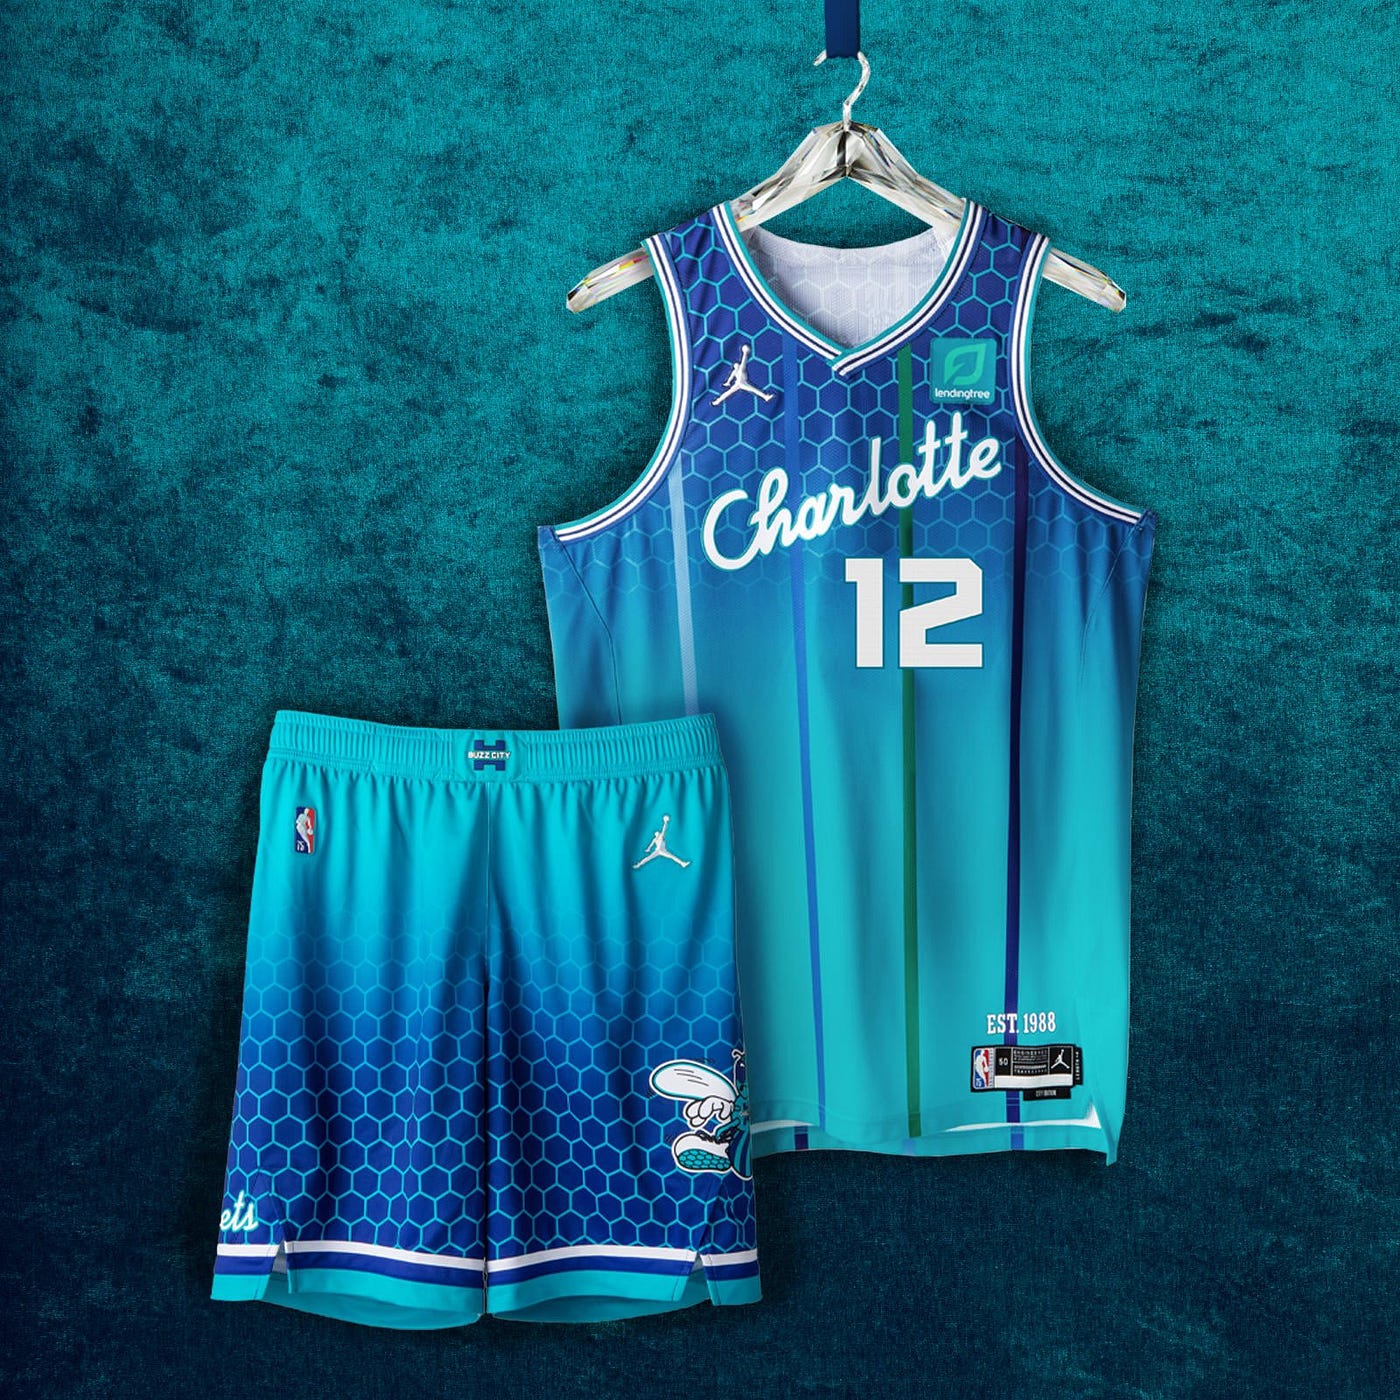 Charlotte Hornets: Do the Buzz City Uniforms Give an Edge?